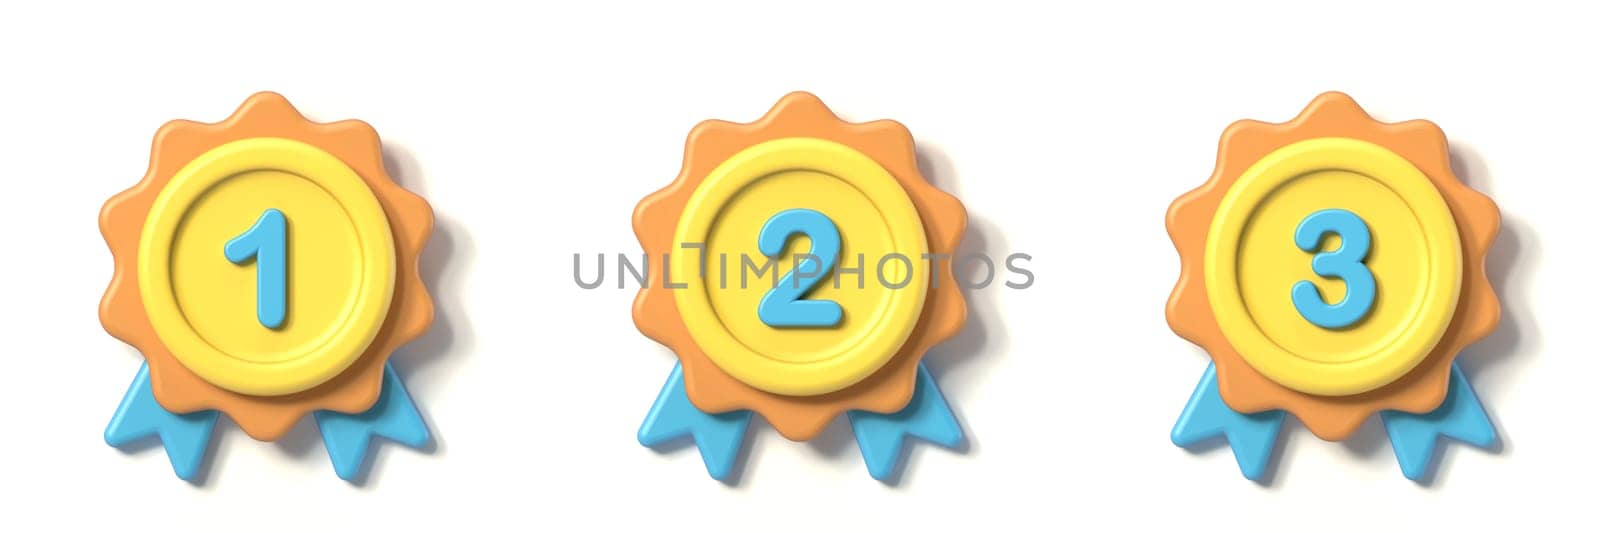 First, second and third place medals 3D rendering illustration isolated on white background